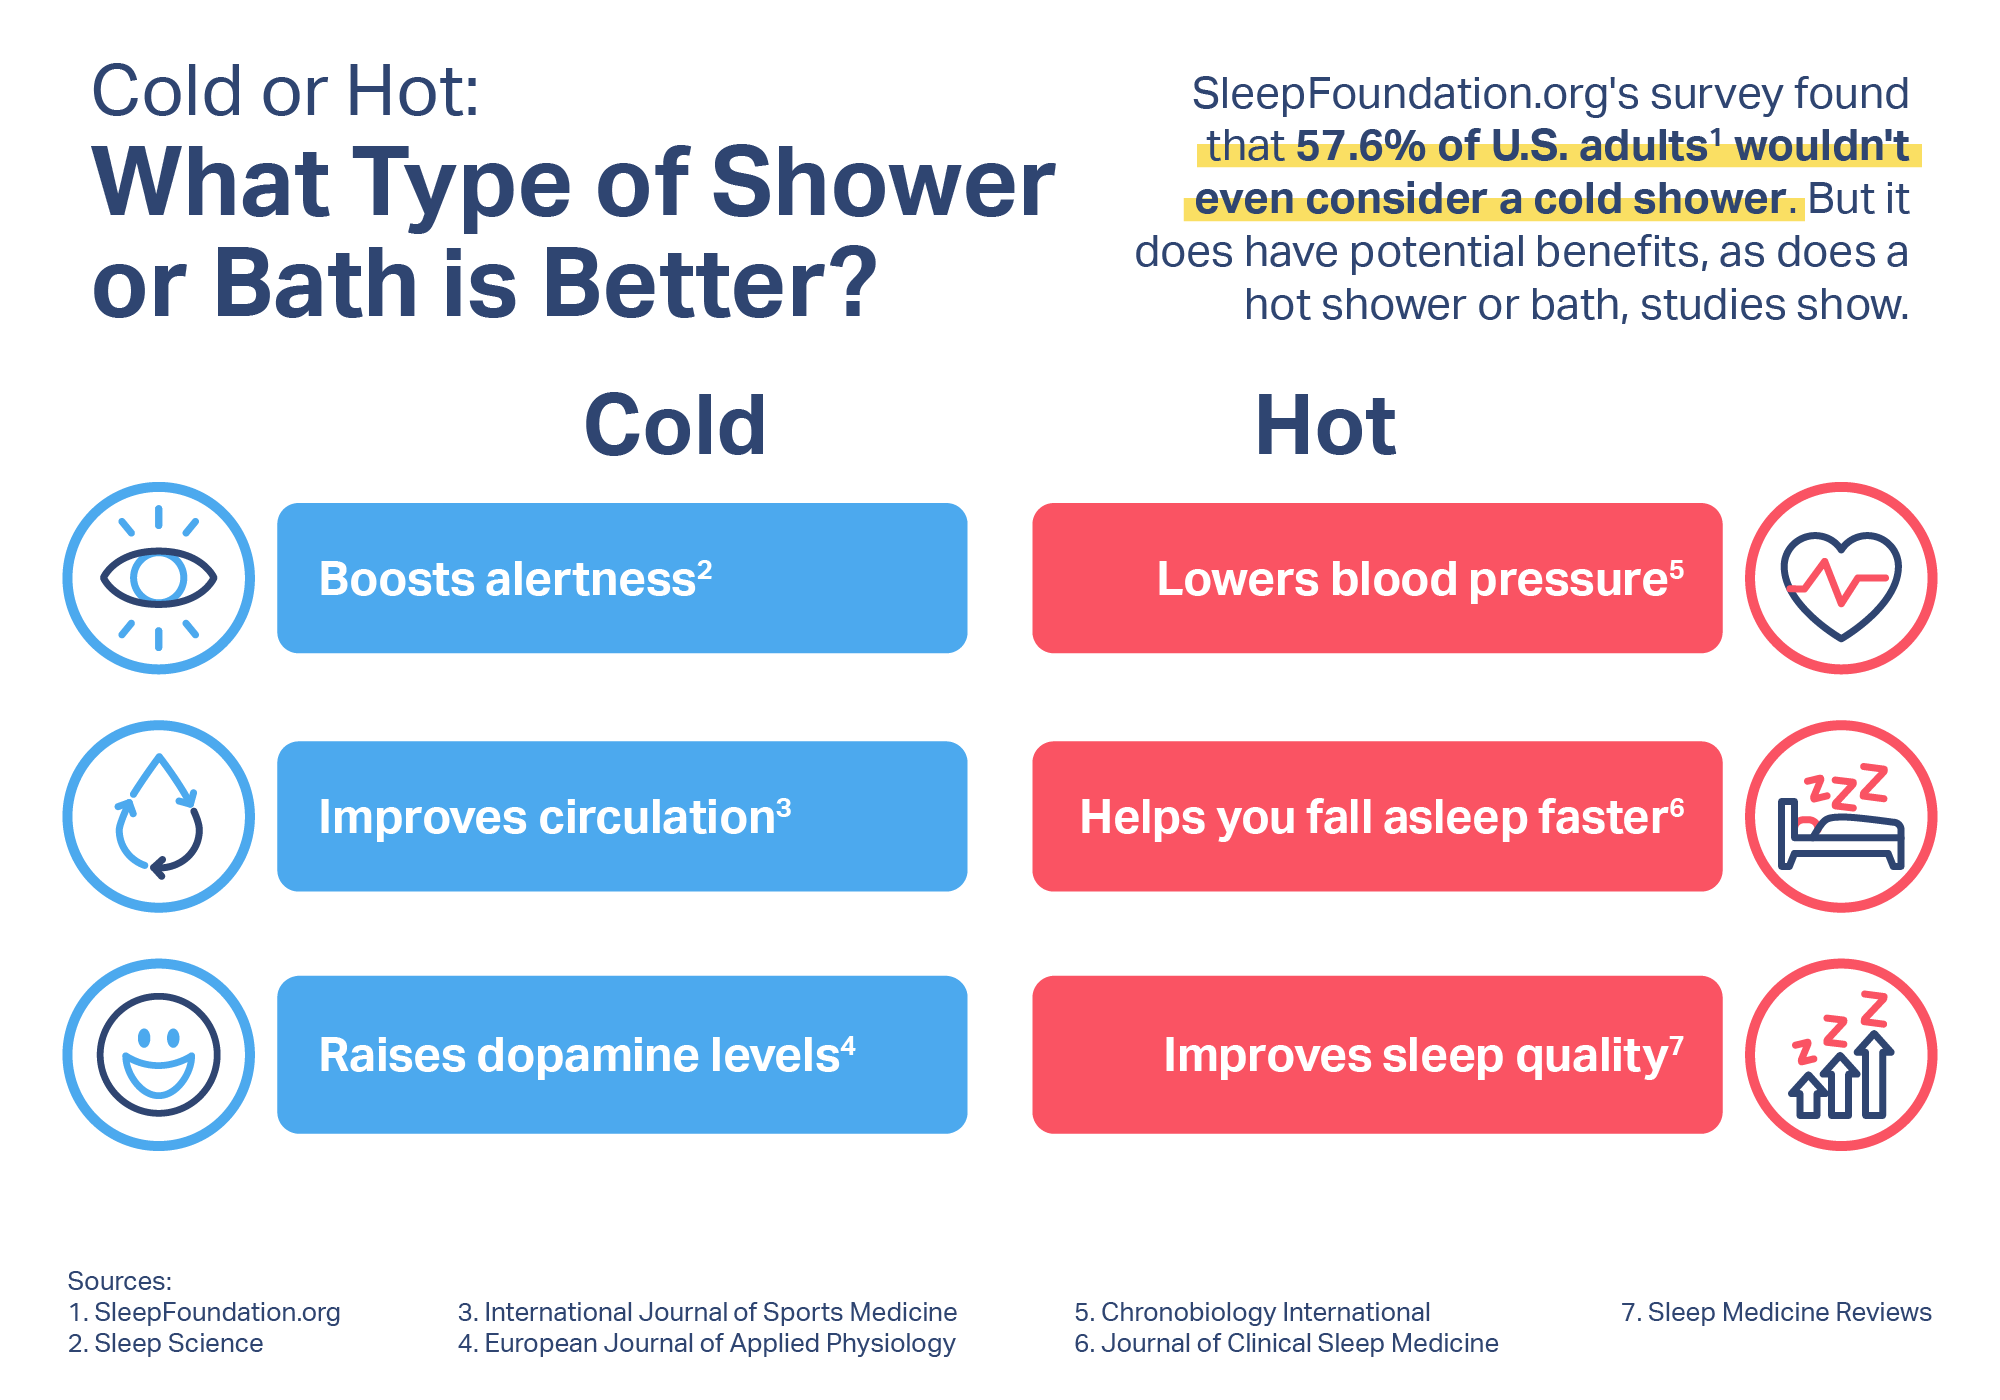 Cold or Hot: What Type of Shower or Bath is Better?